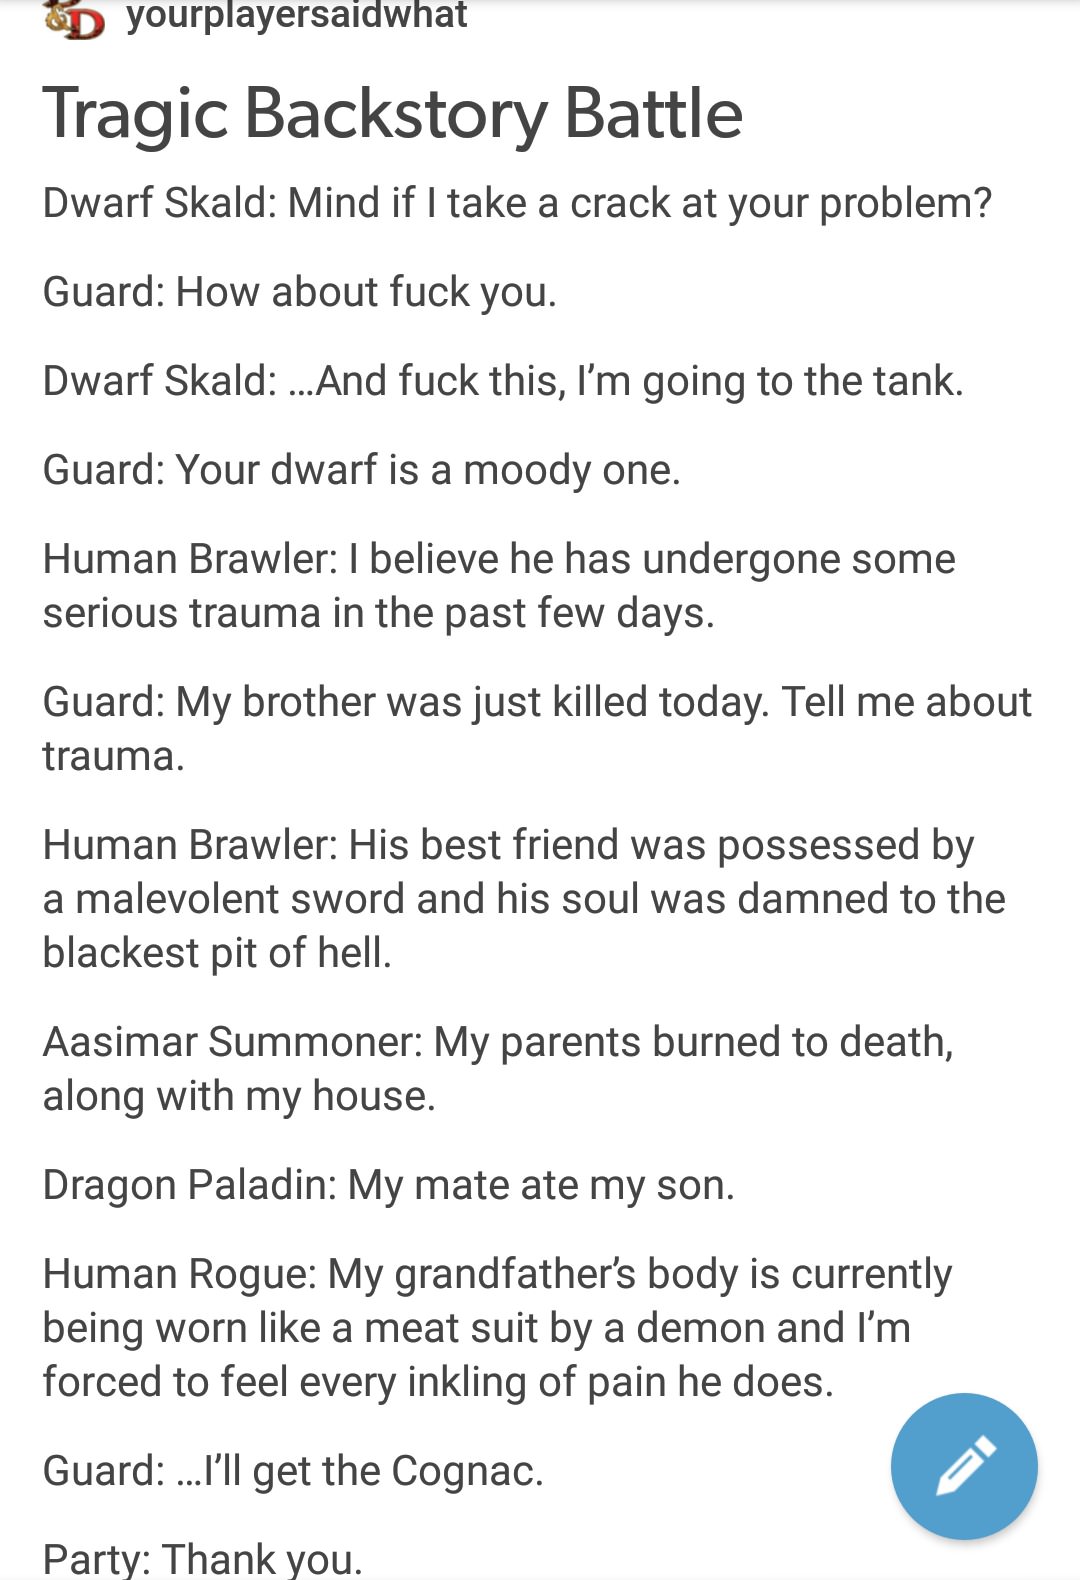 yourplayersaidwhat dwarf - yourplayersaidwhat Tragic Backstory Battle Dwarf Skald Mind if I take a crack at your problem? Guard How about fuck you. Dwarf Skald ...And fuck this, I'm going to the tank. Guard Your dwarf is a moody one. Human Brawler I belie